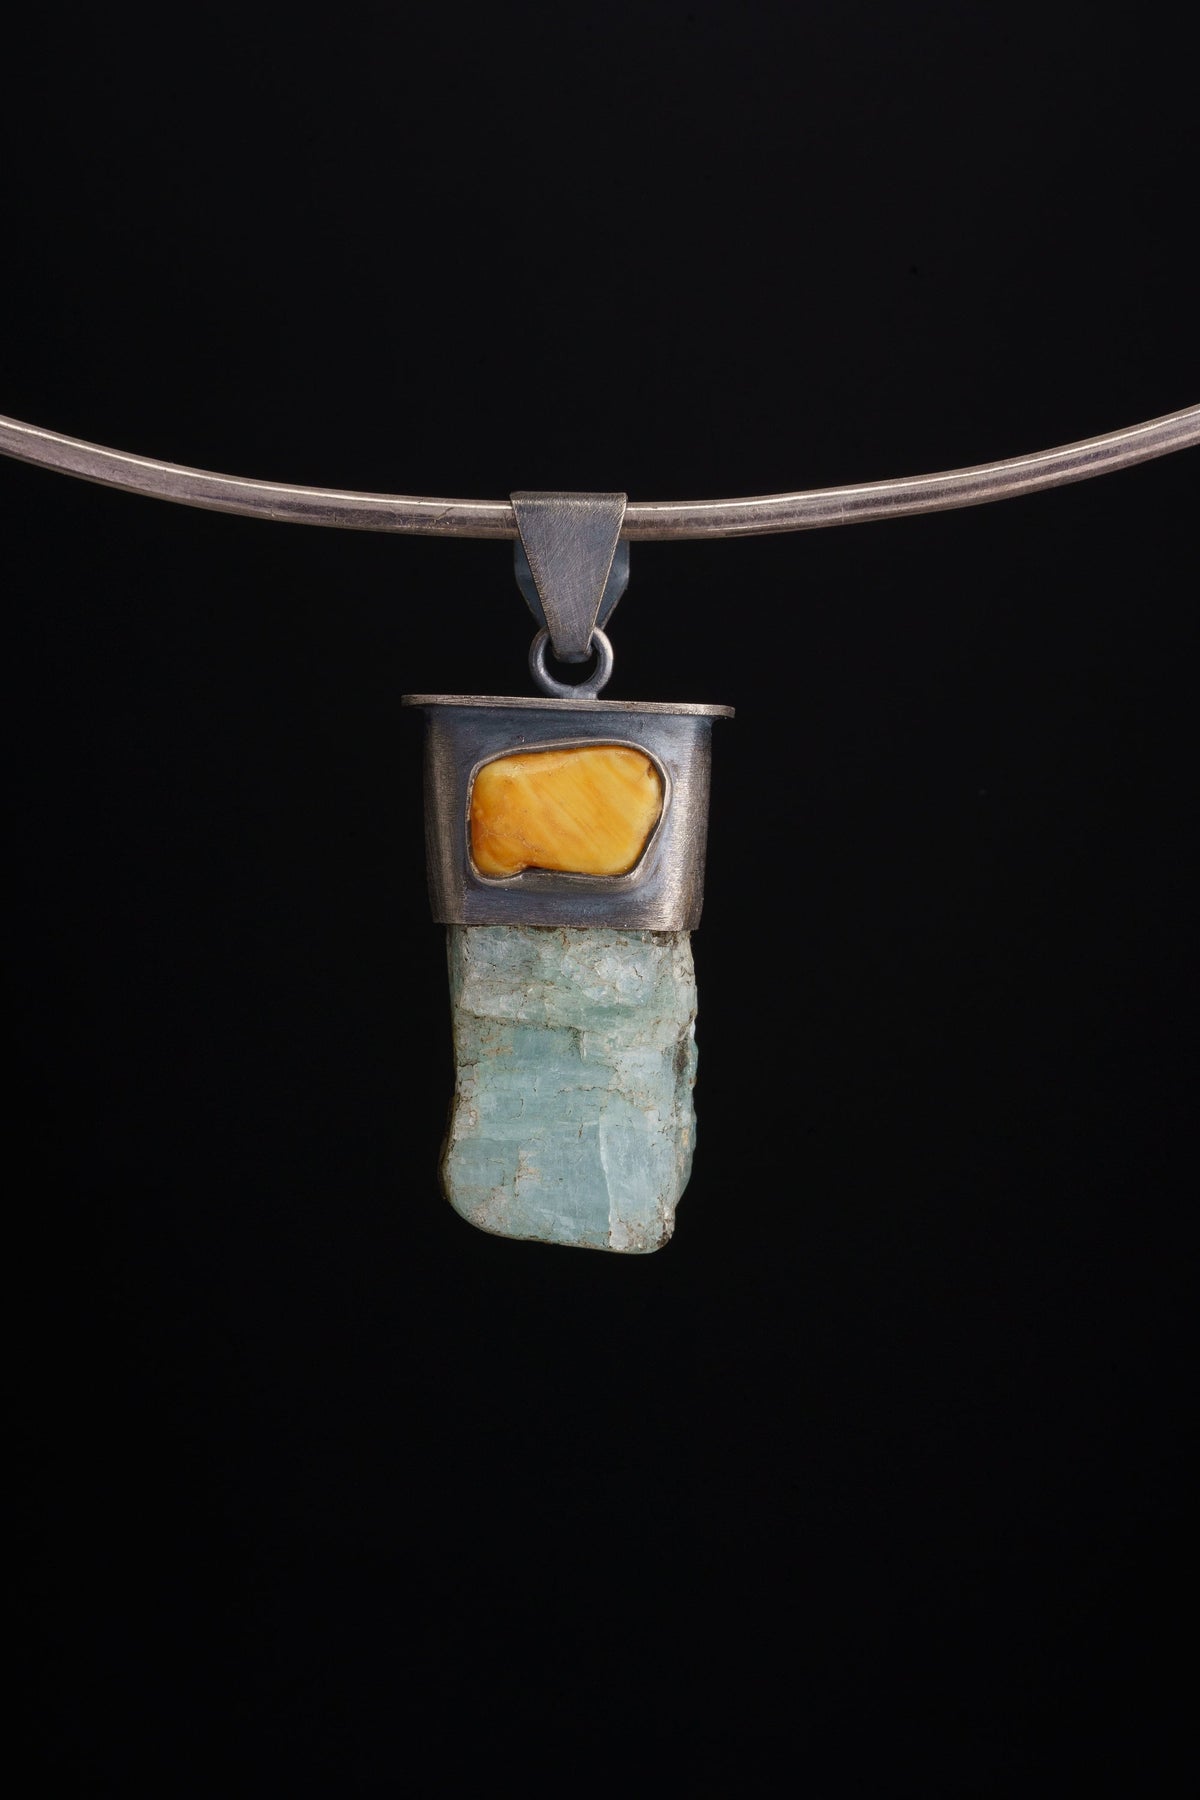 Heavy-Set Oxidised Sterling Silver Pendant with Hand-Sourced Australian Aquamarine & Baltic Amber Accents - A Rustic Tribute to Sea and Sun